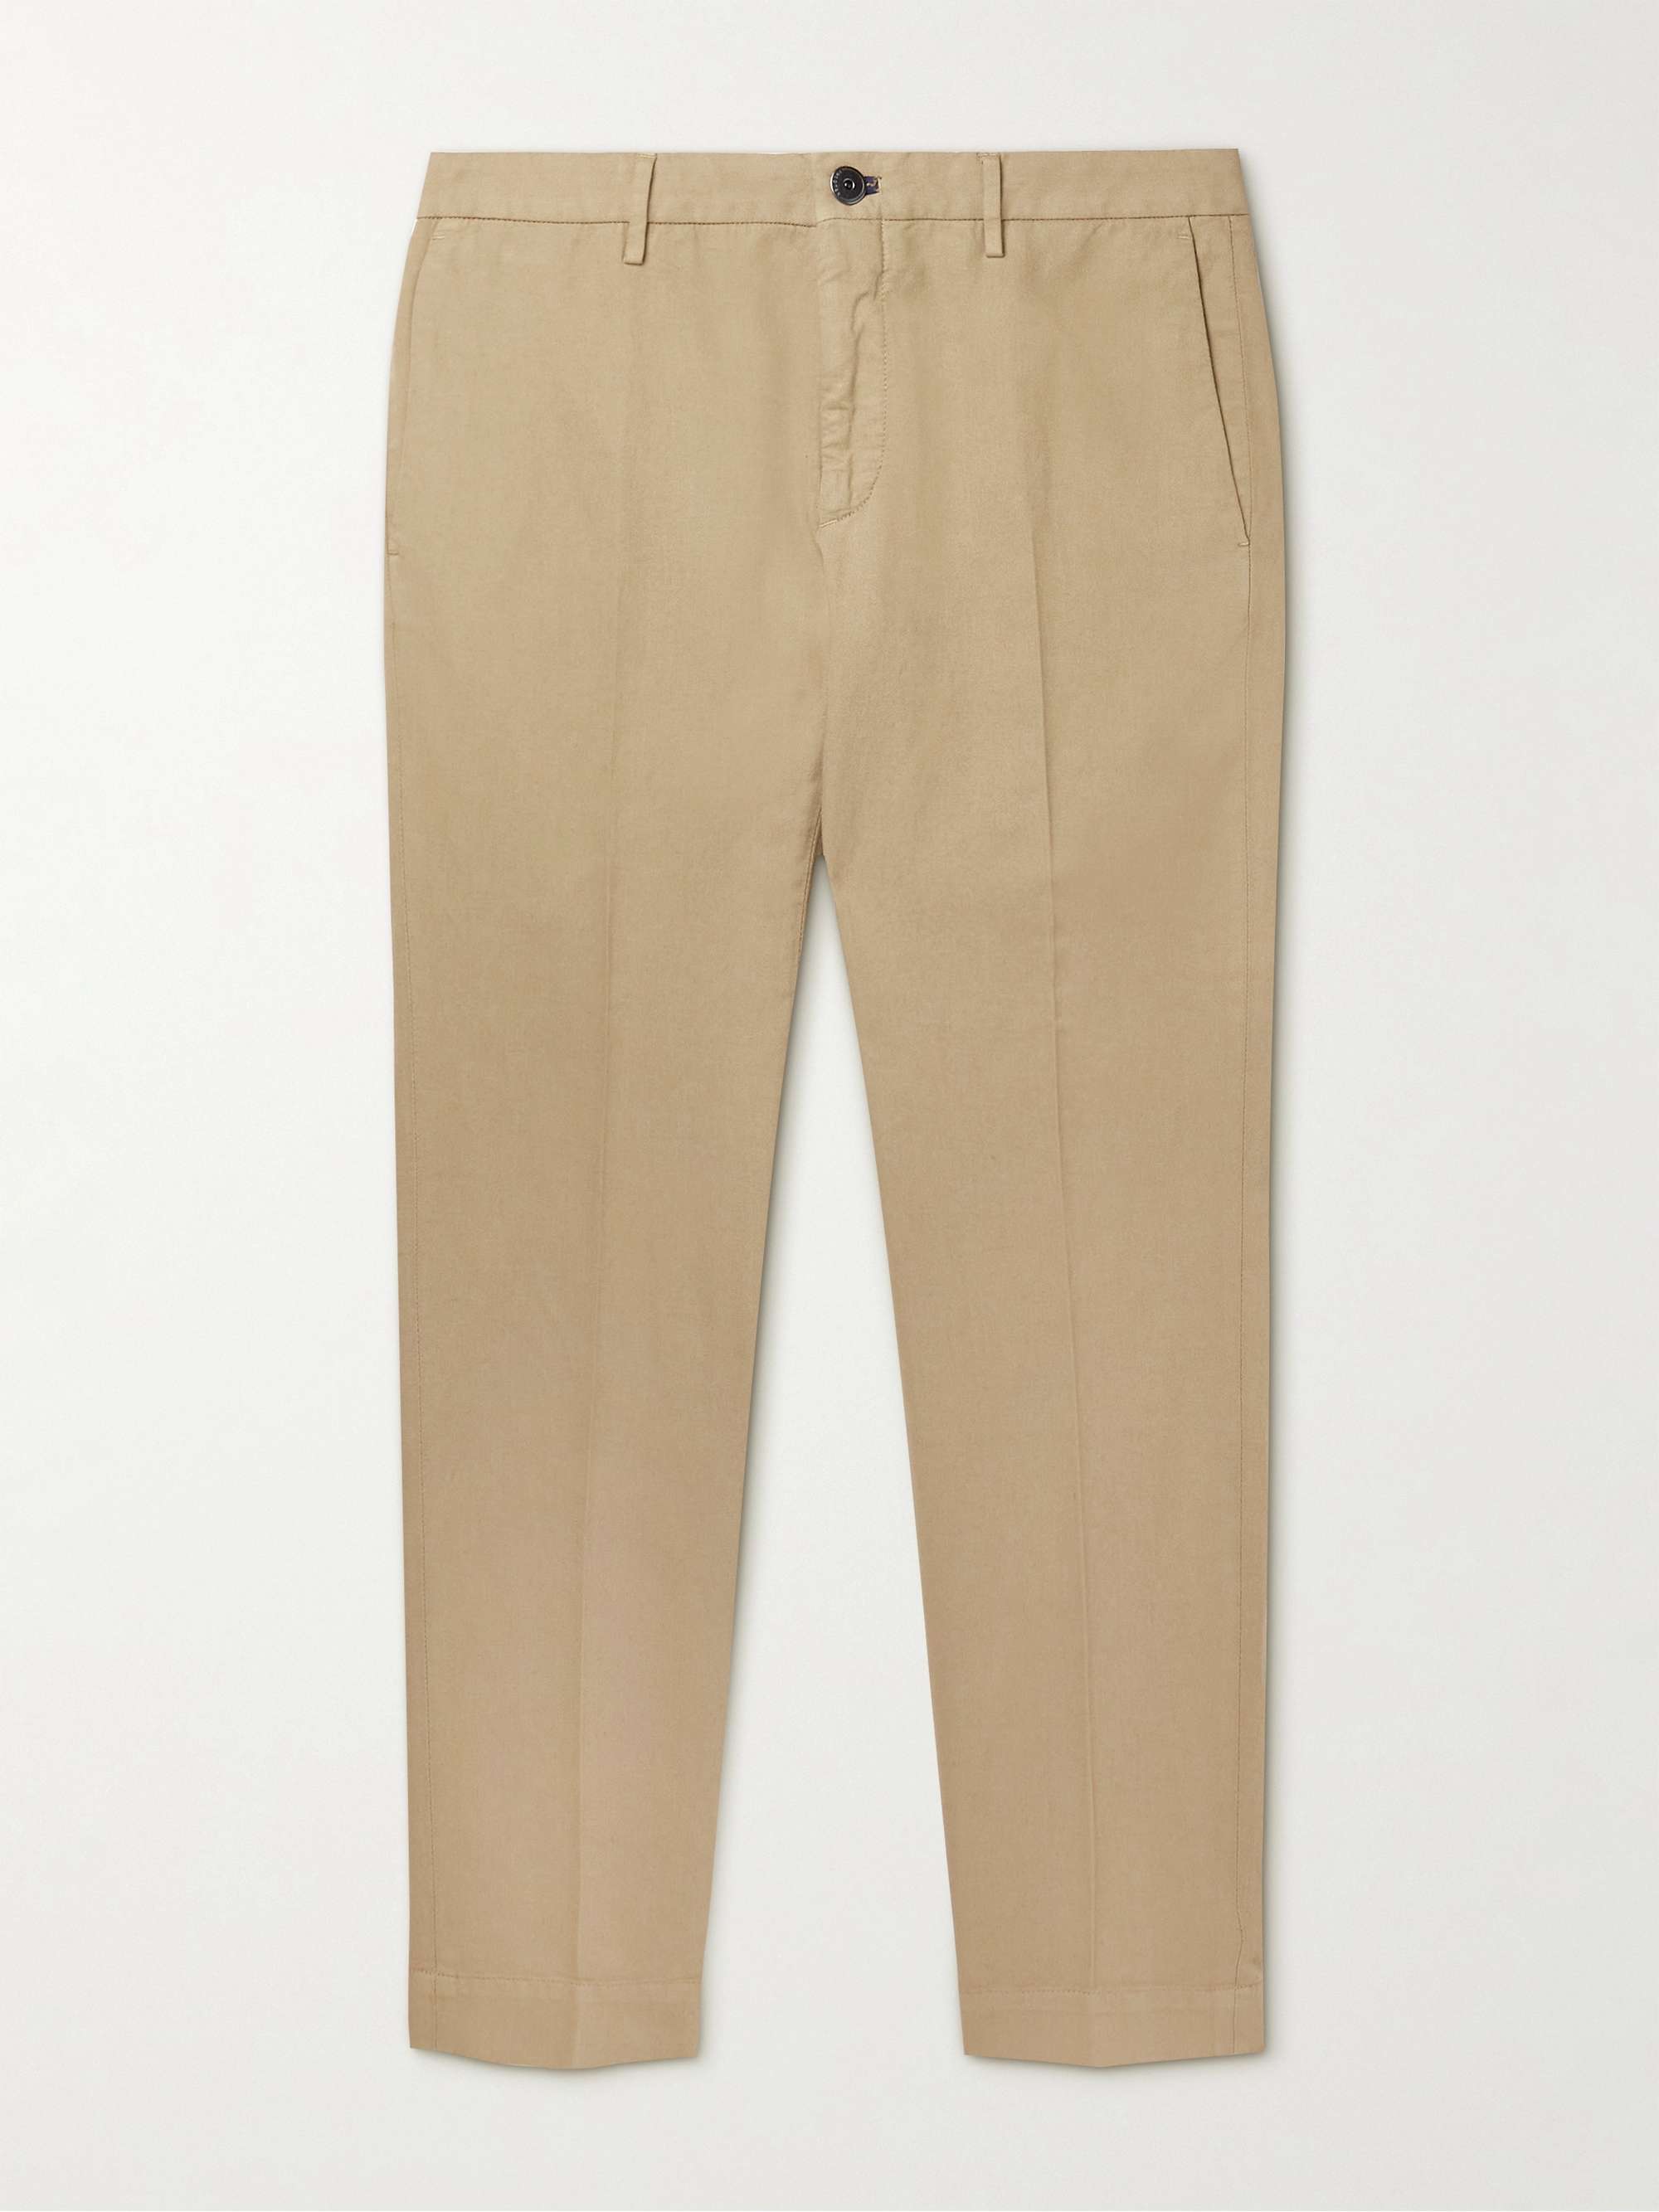 klink buis Gedrag INCOTEX Slim-Fit Pleated Cotton and Linen-Blend Twill Trousers | MR PORTER